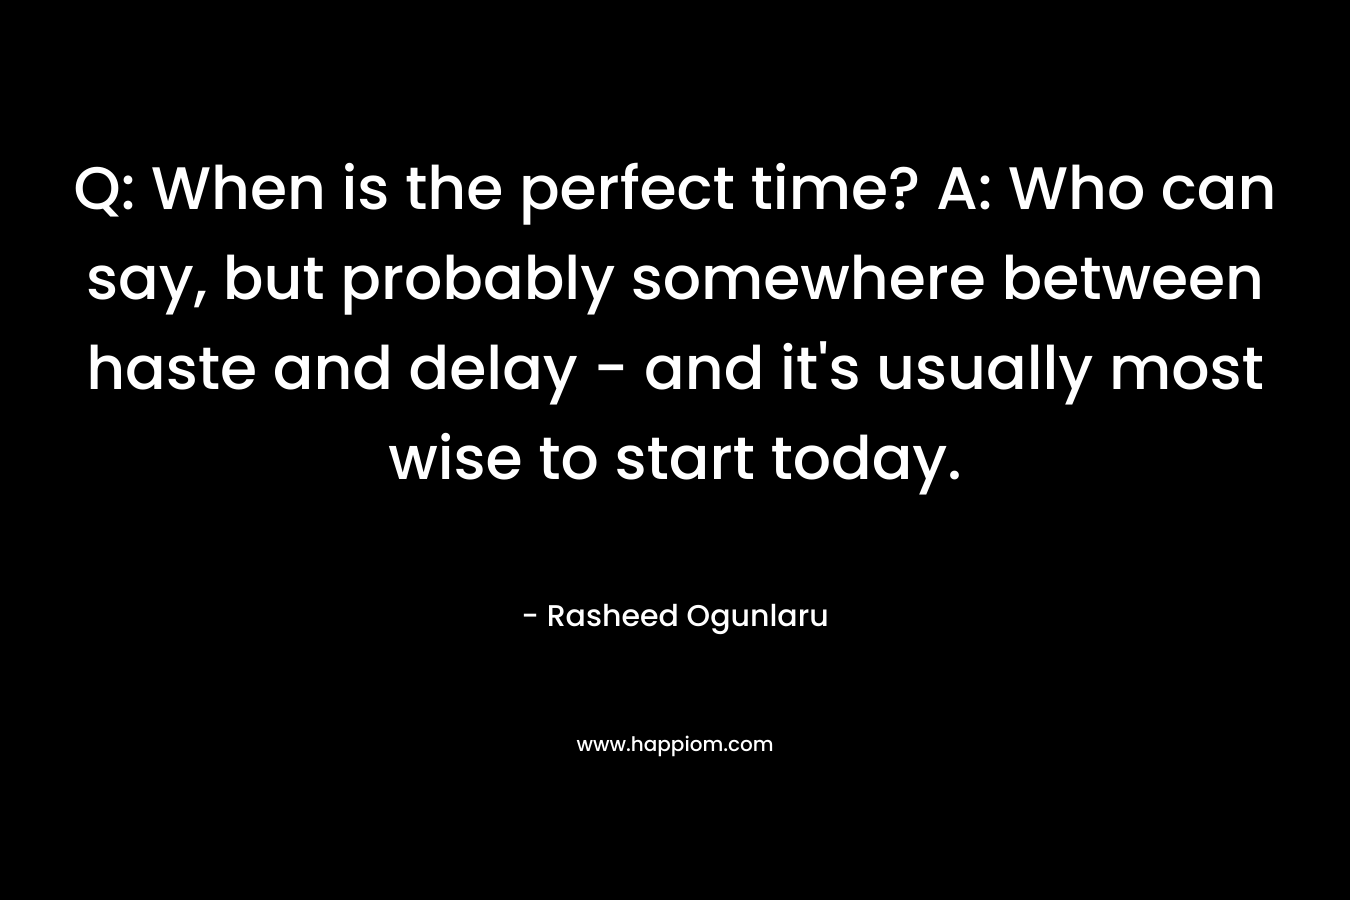 Q: When is the perfect time? A: Who can say, but probably somewhere between haste and delay - and it's usually most wise to start today.